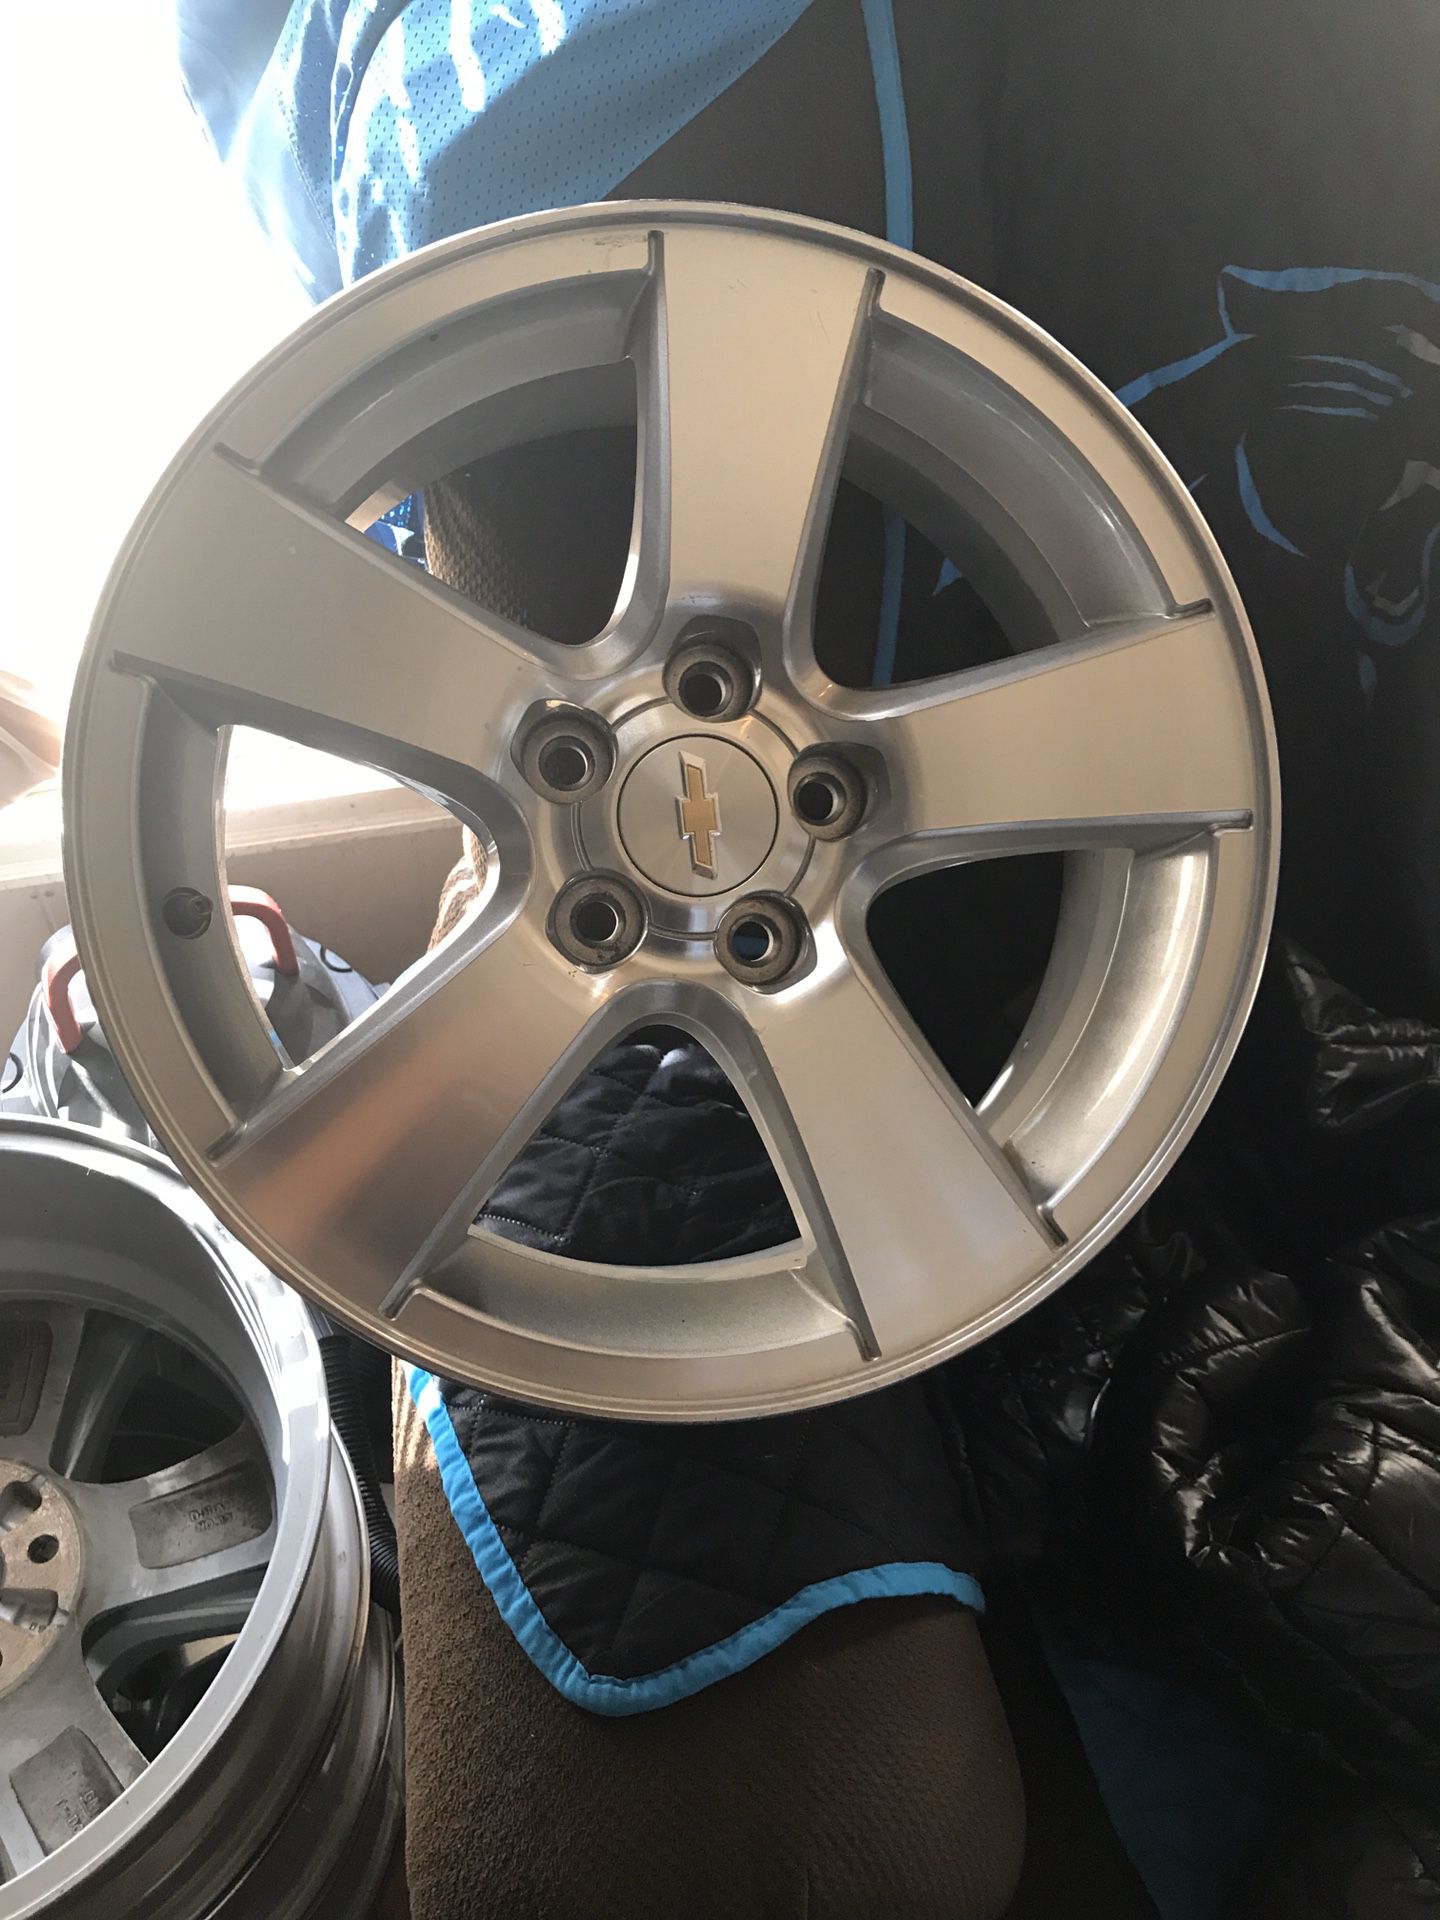 17” rim for Chevy